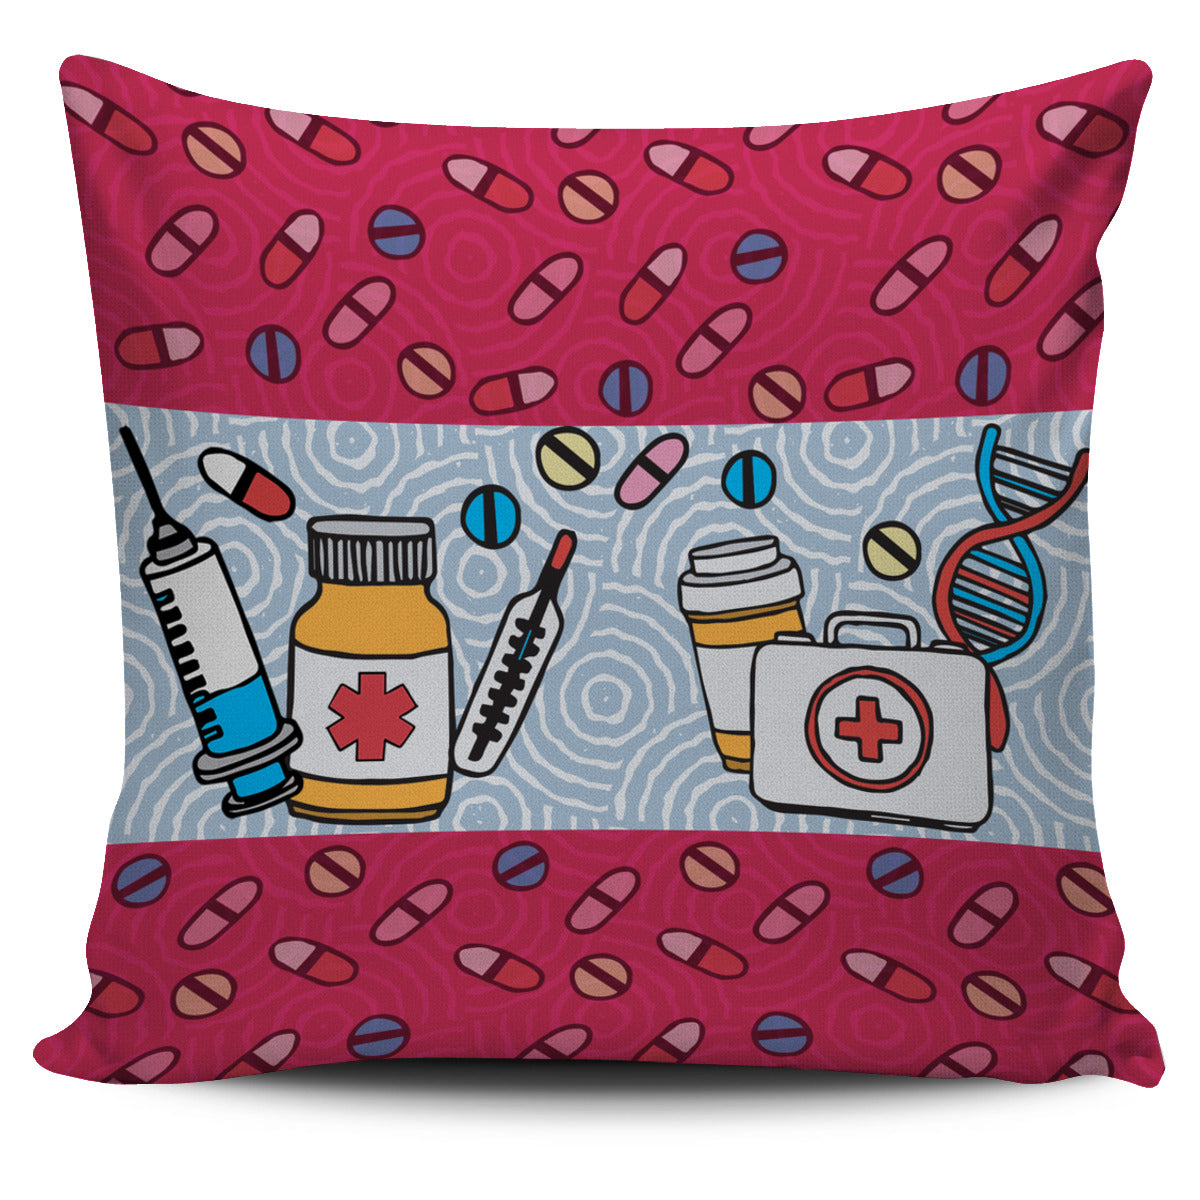 Pharmacist RX Pillow Cover